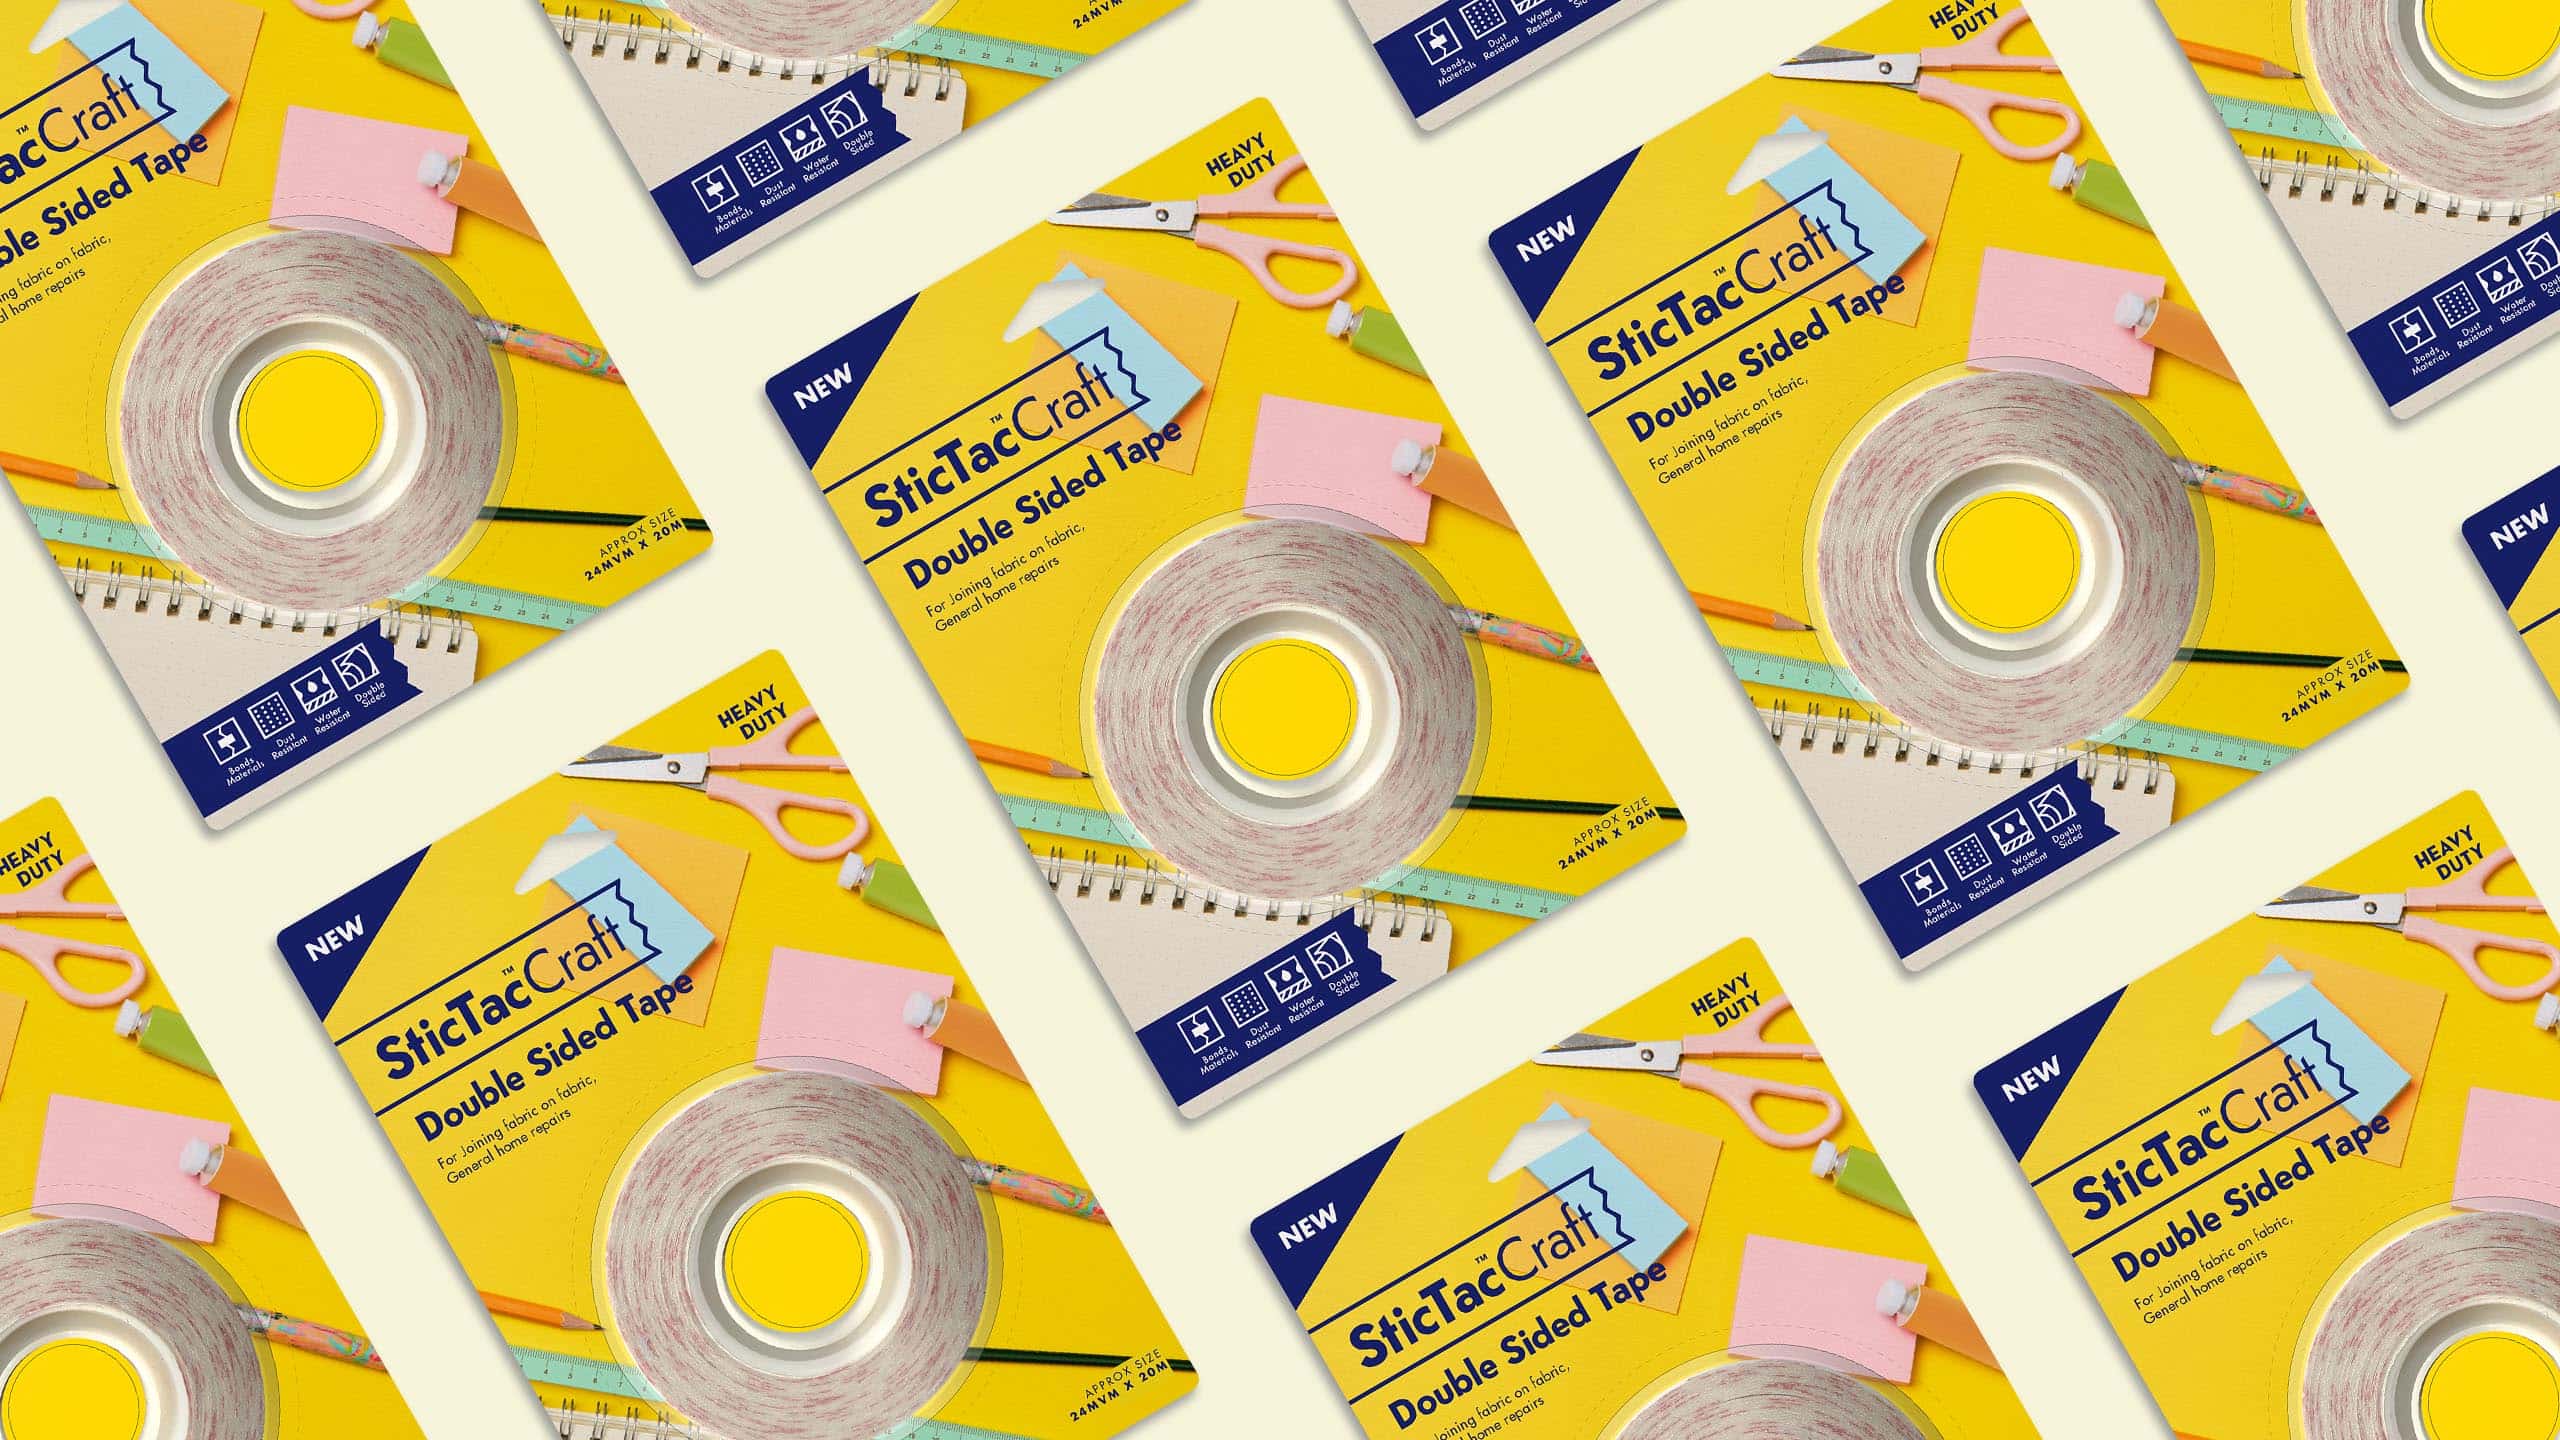 Packaging and product photos for SticTac Craft's double sided tape